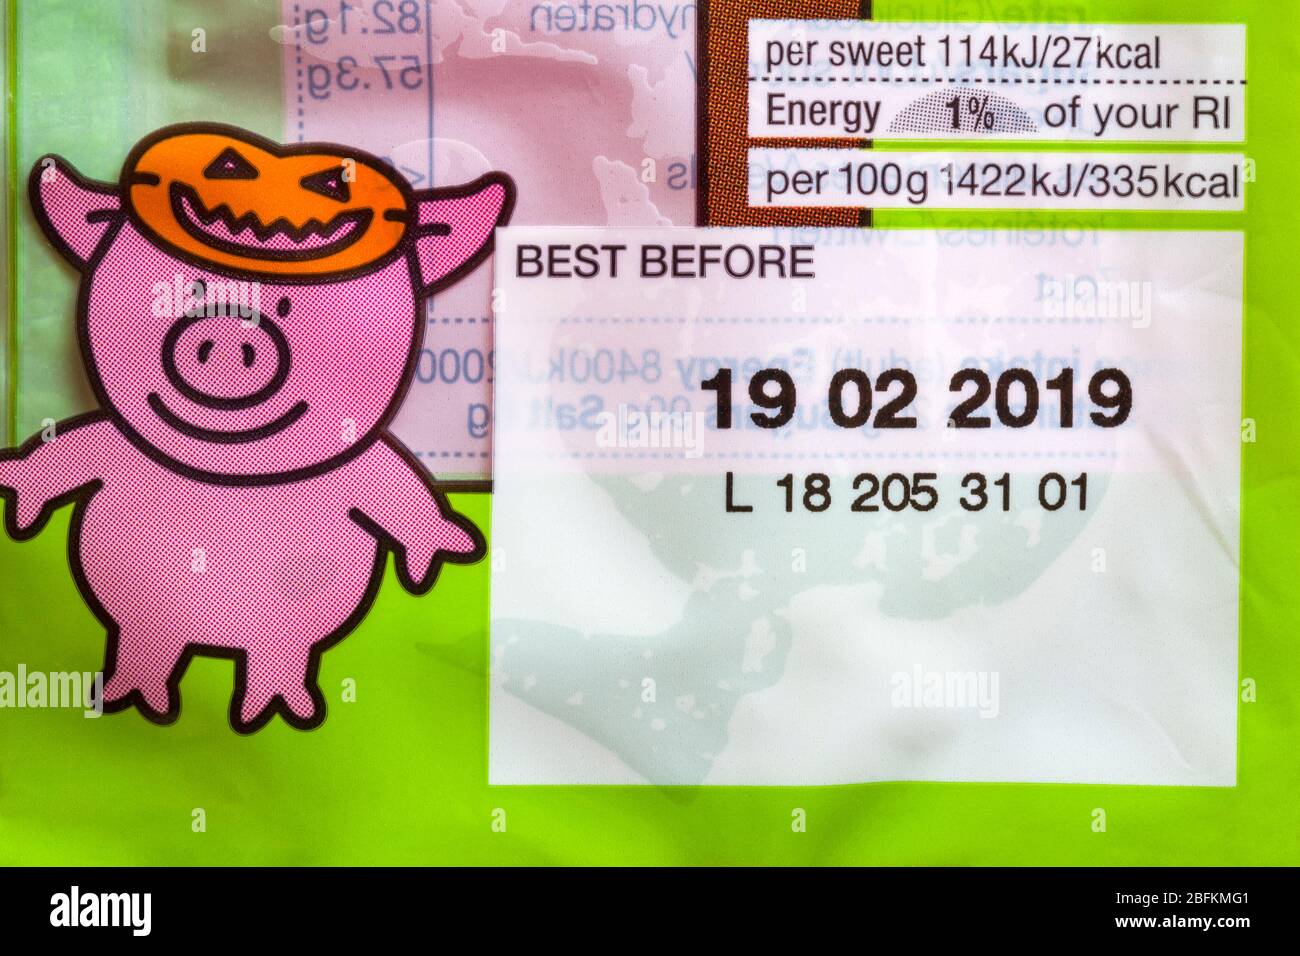 Best before date on packet of M&S Percy pumpkin sweets - Percy Pig sweets Stock Photo